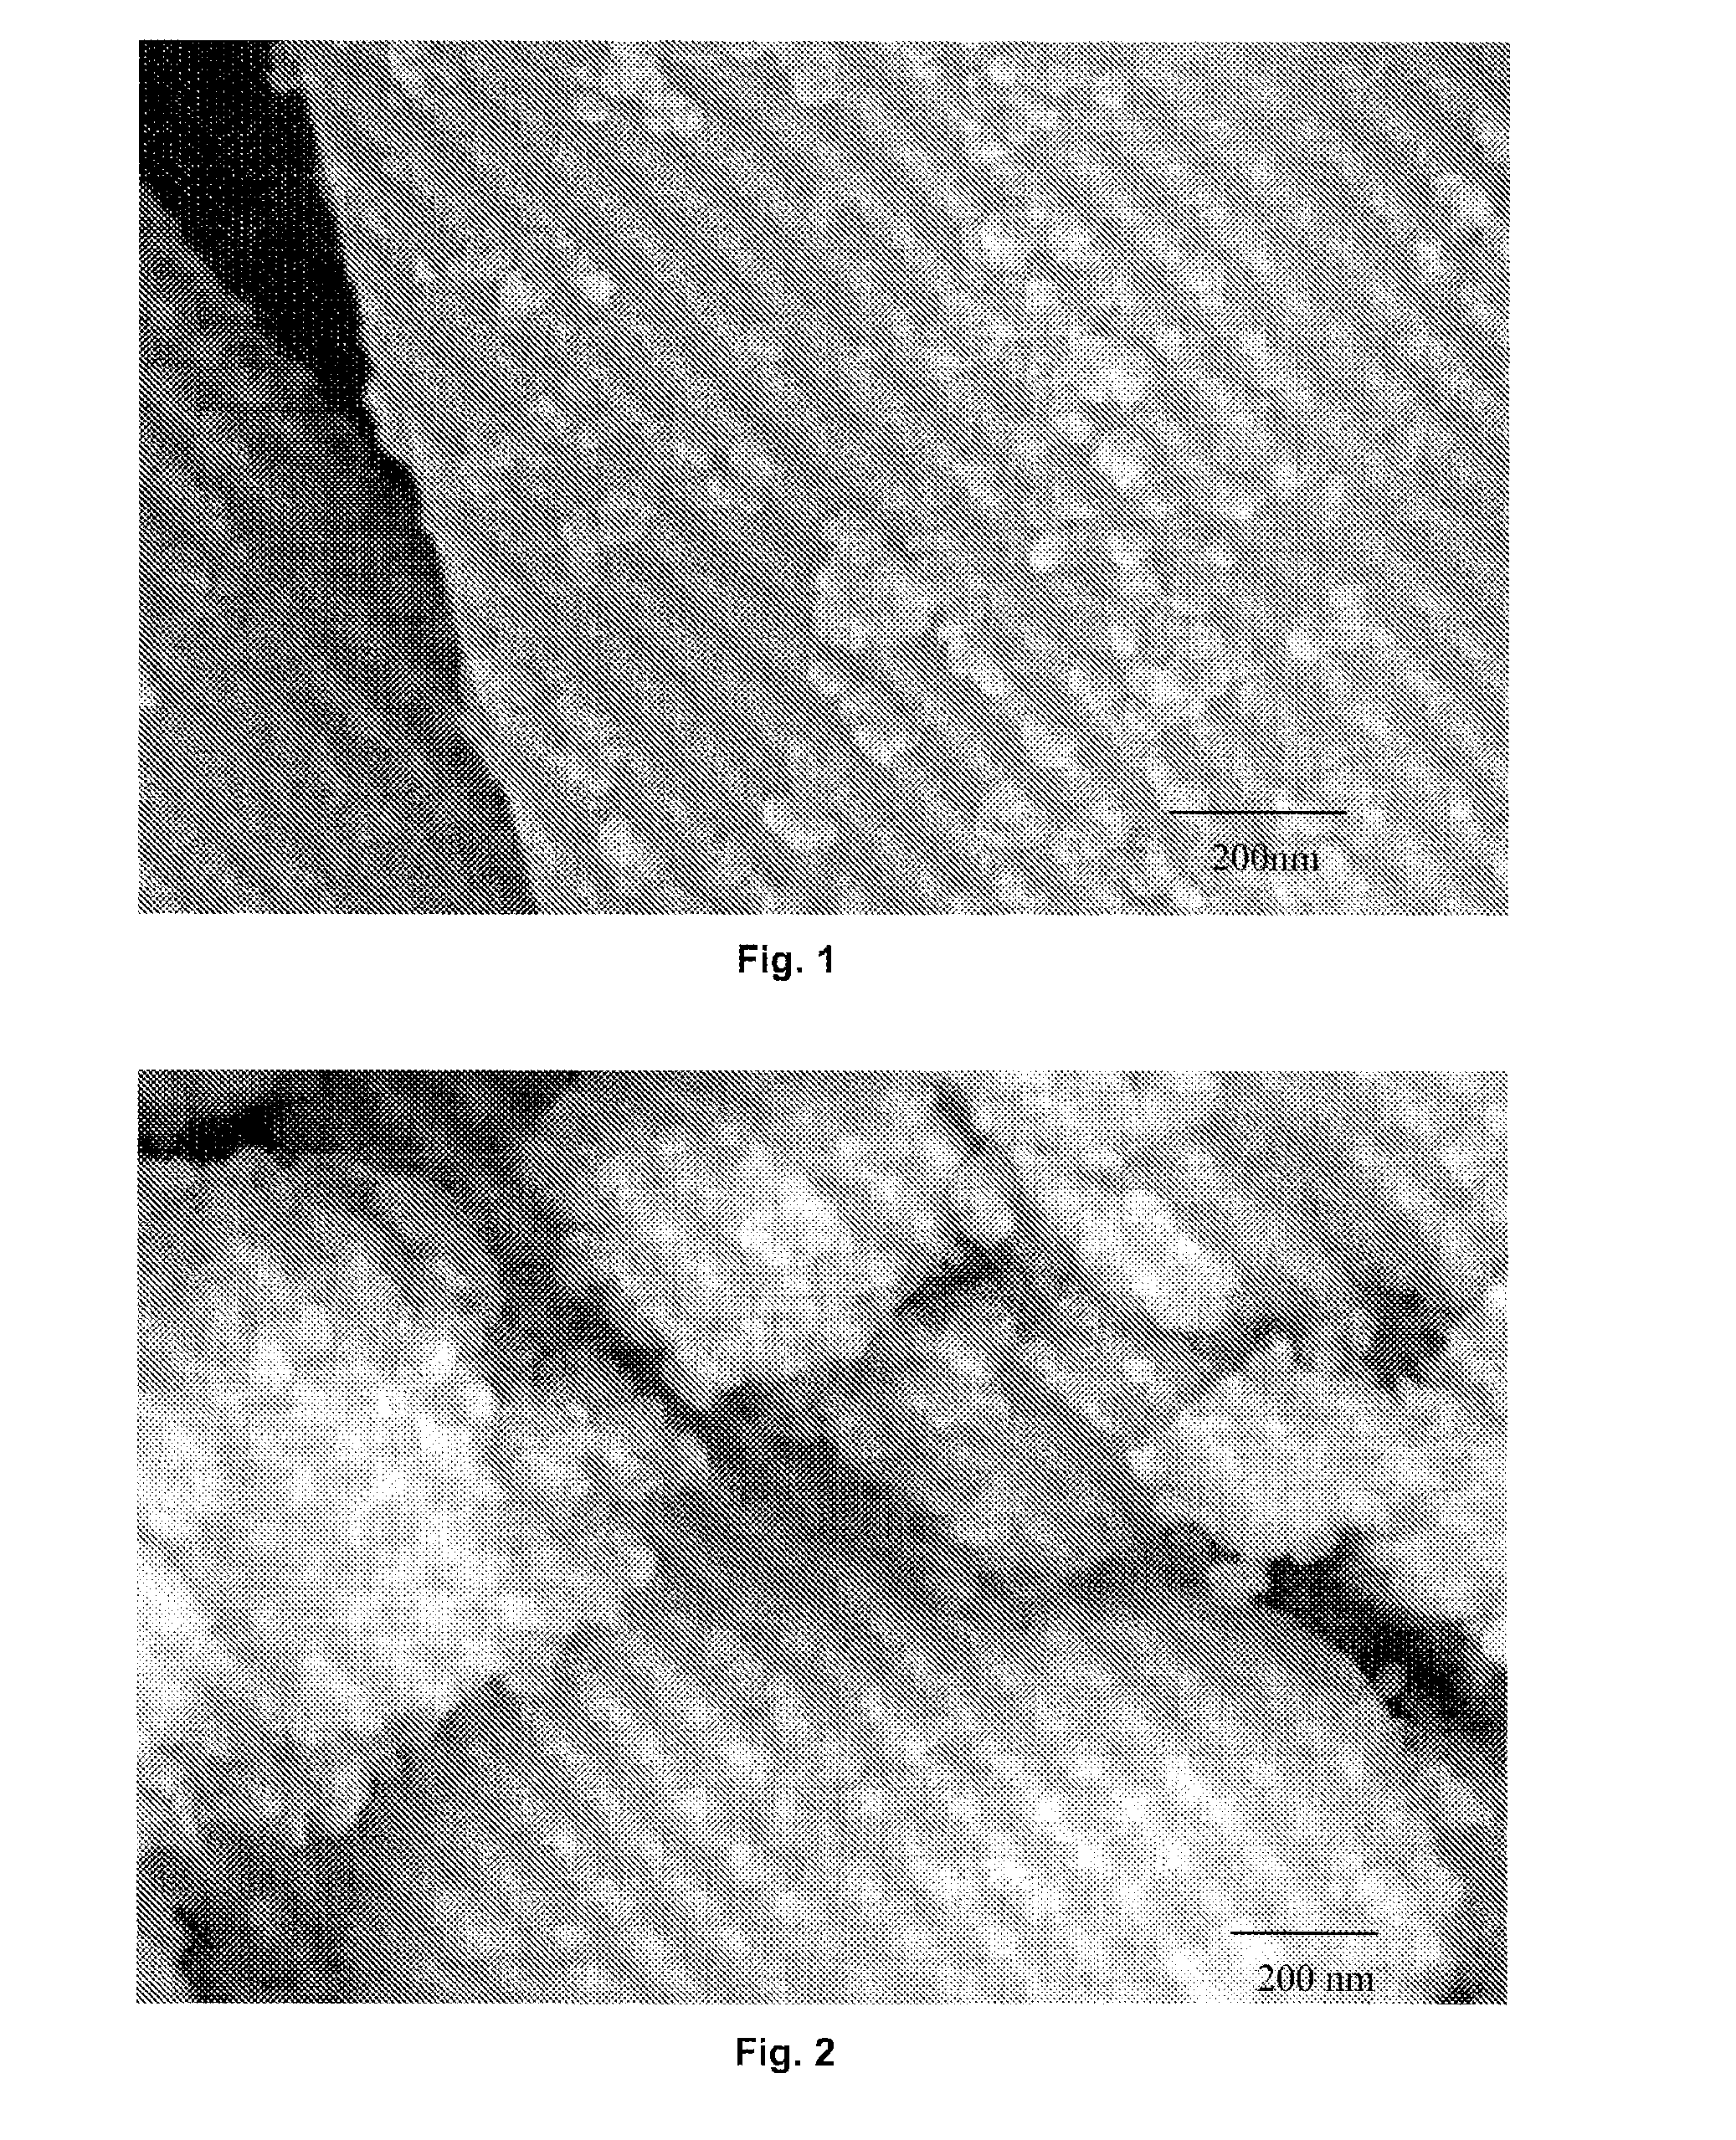 Method for the dry dispersion of nanoparticles and the production of hierarchical structures and coatings